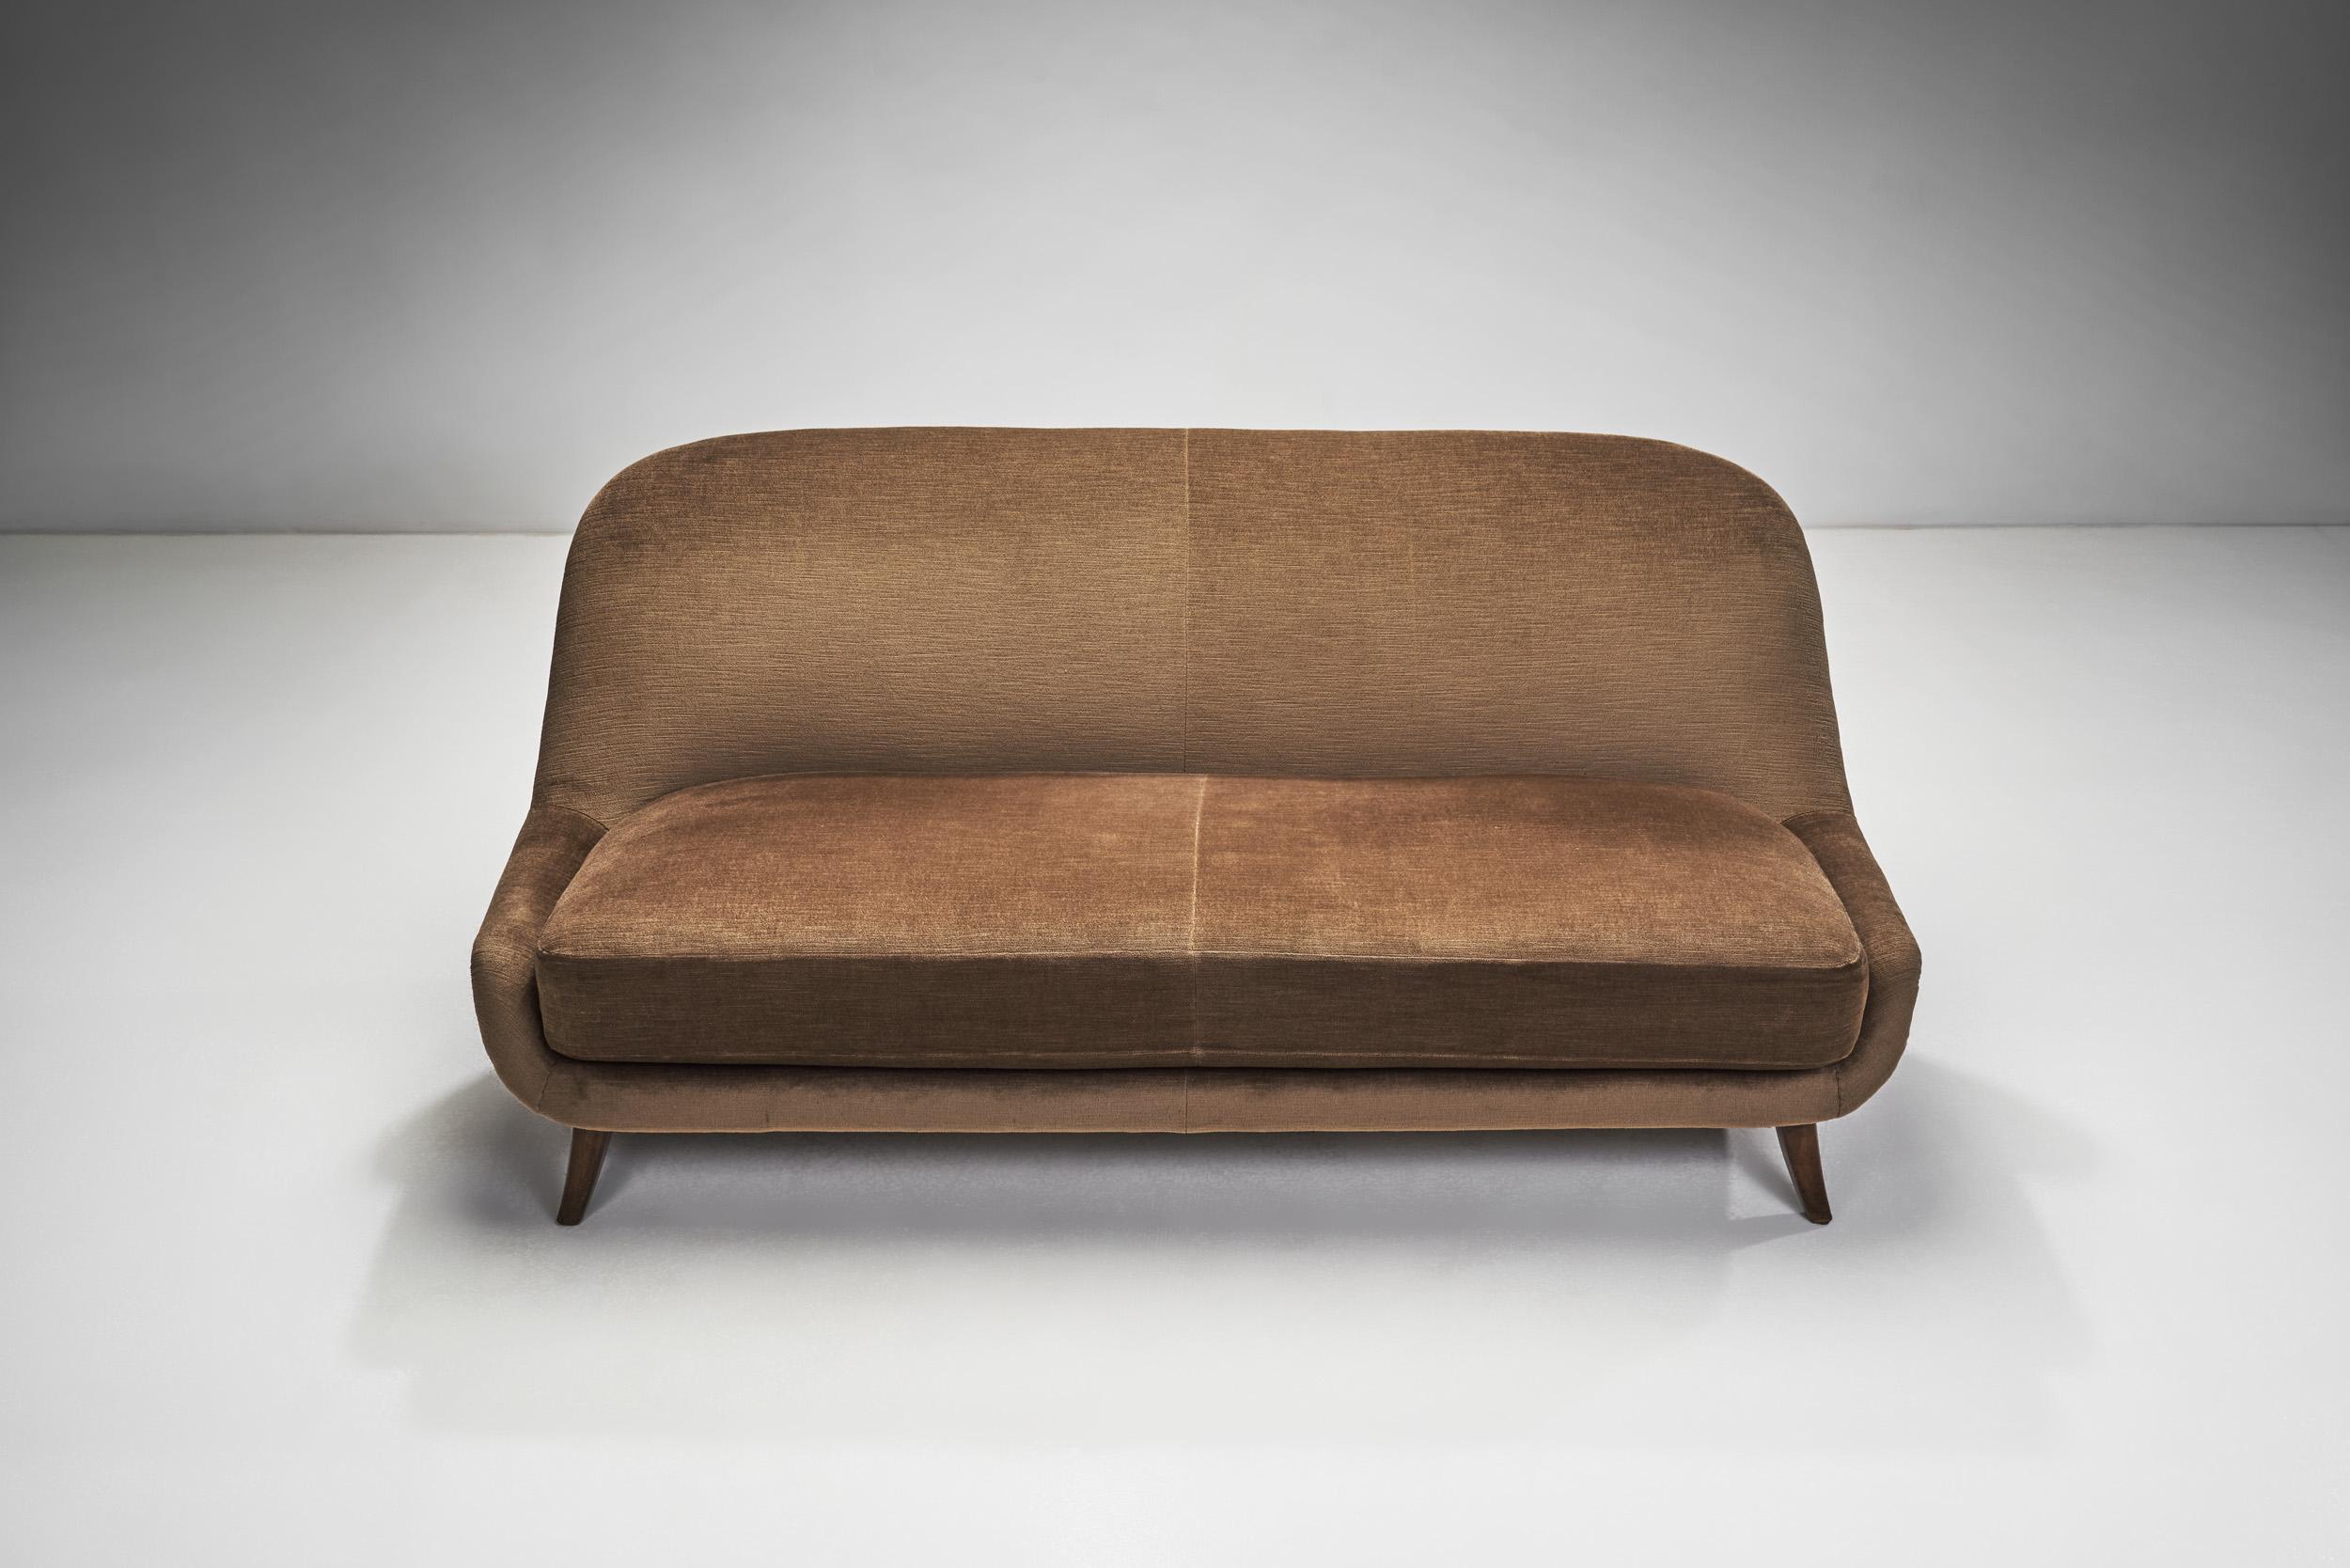 20th Century Velour Two-Seater Sofa with Solid Wood Legs, Europe ca 1950s For Sale